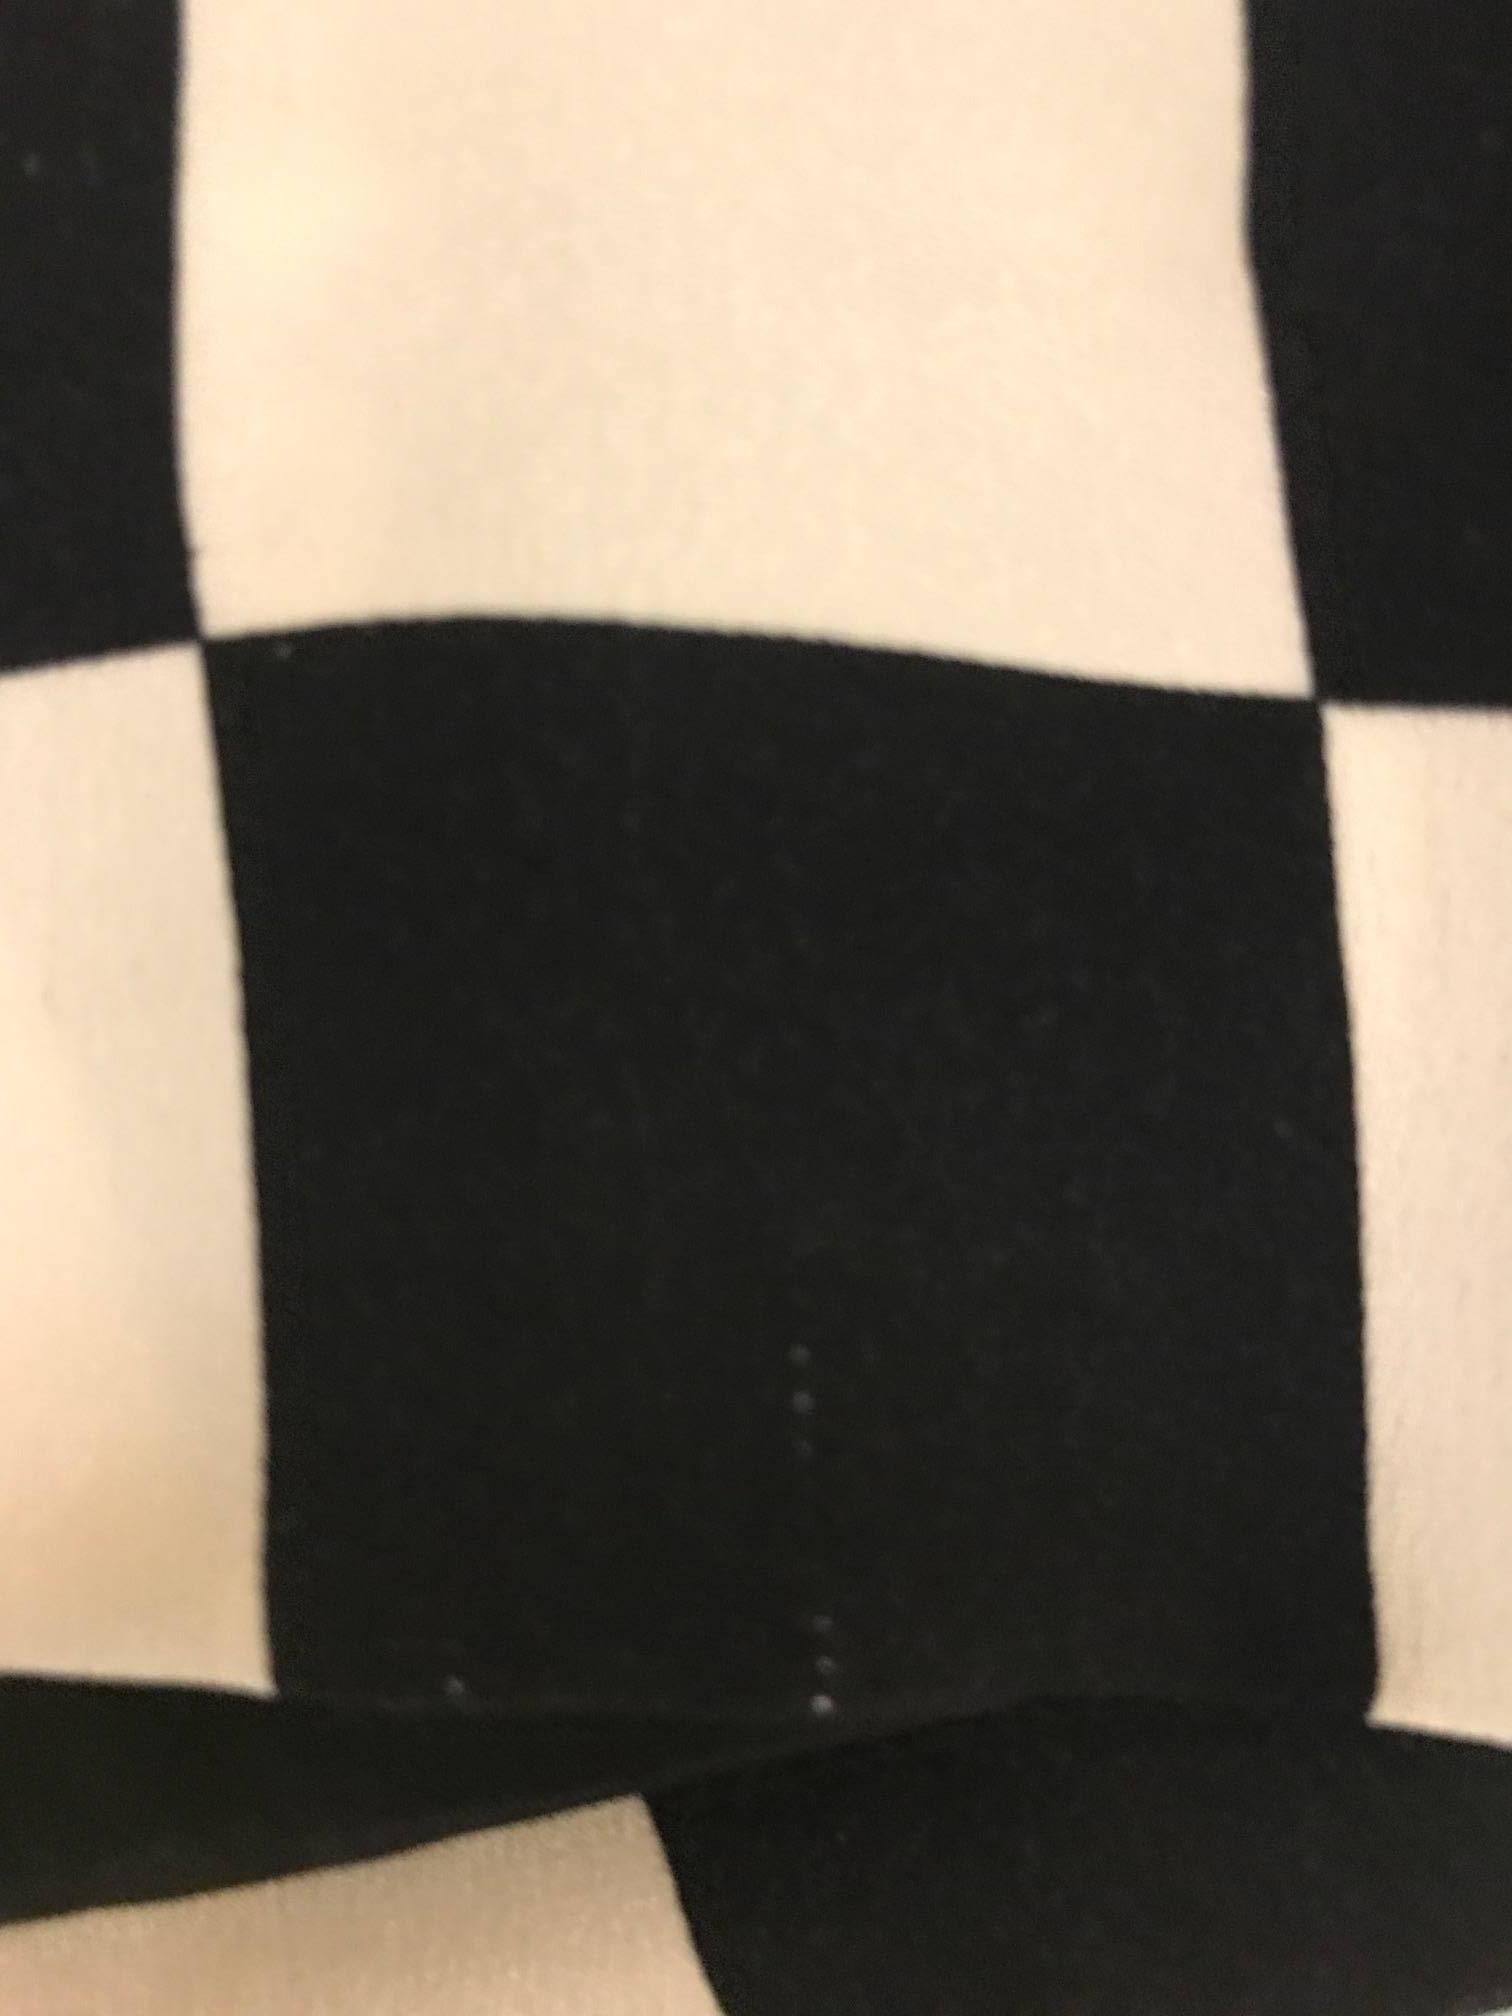 Gianni Versace Couture 1990s Black and White Check Silk Pencil Skirt  1